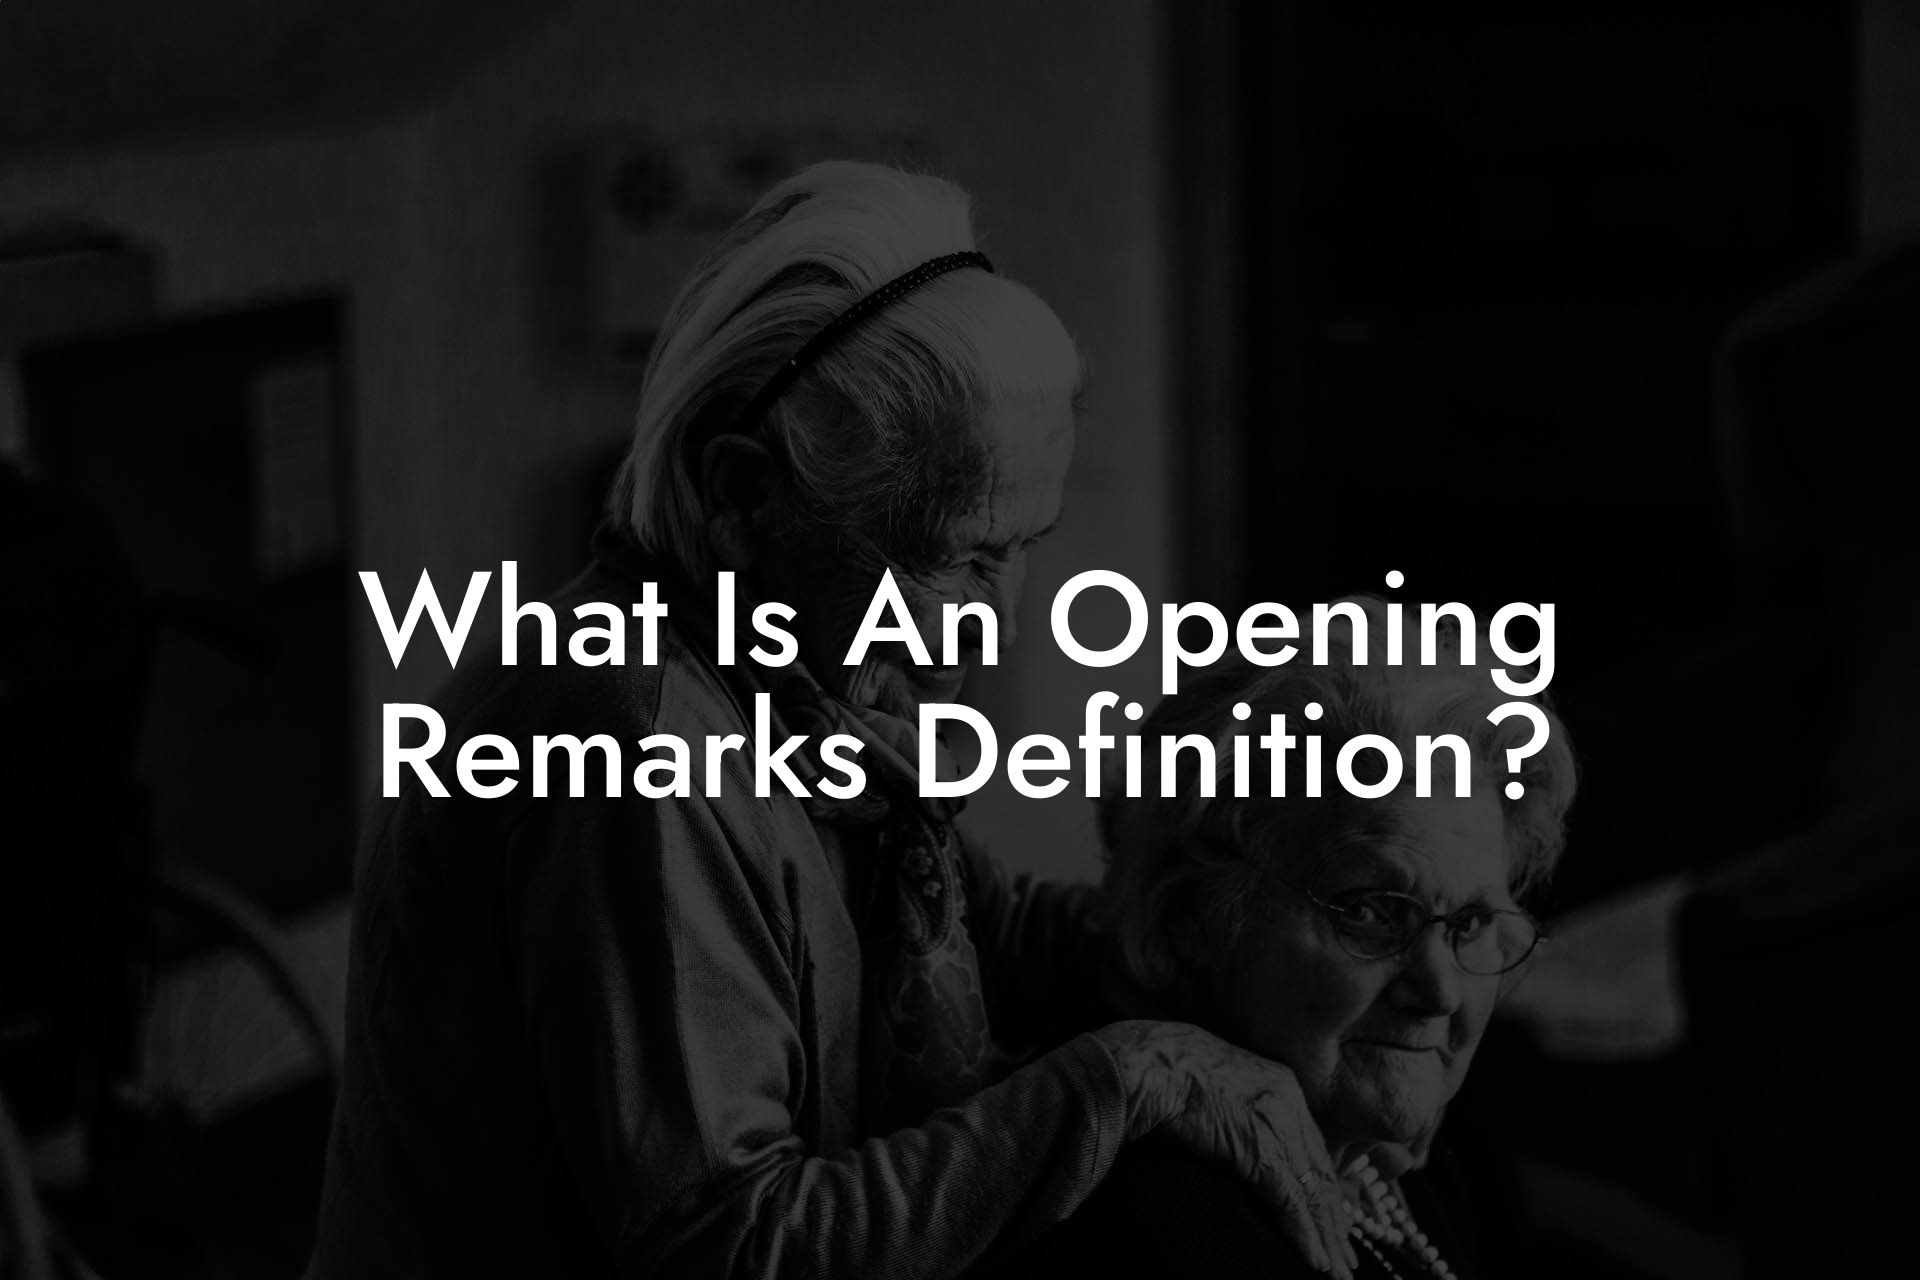 What Is An Opening Remarks Definition?